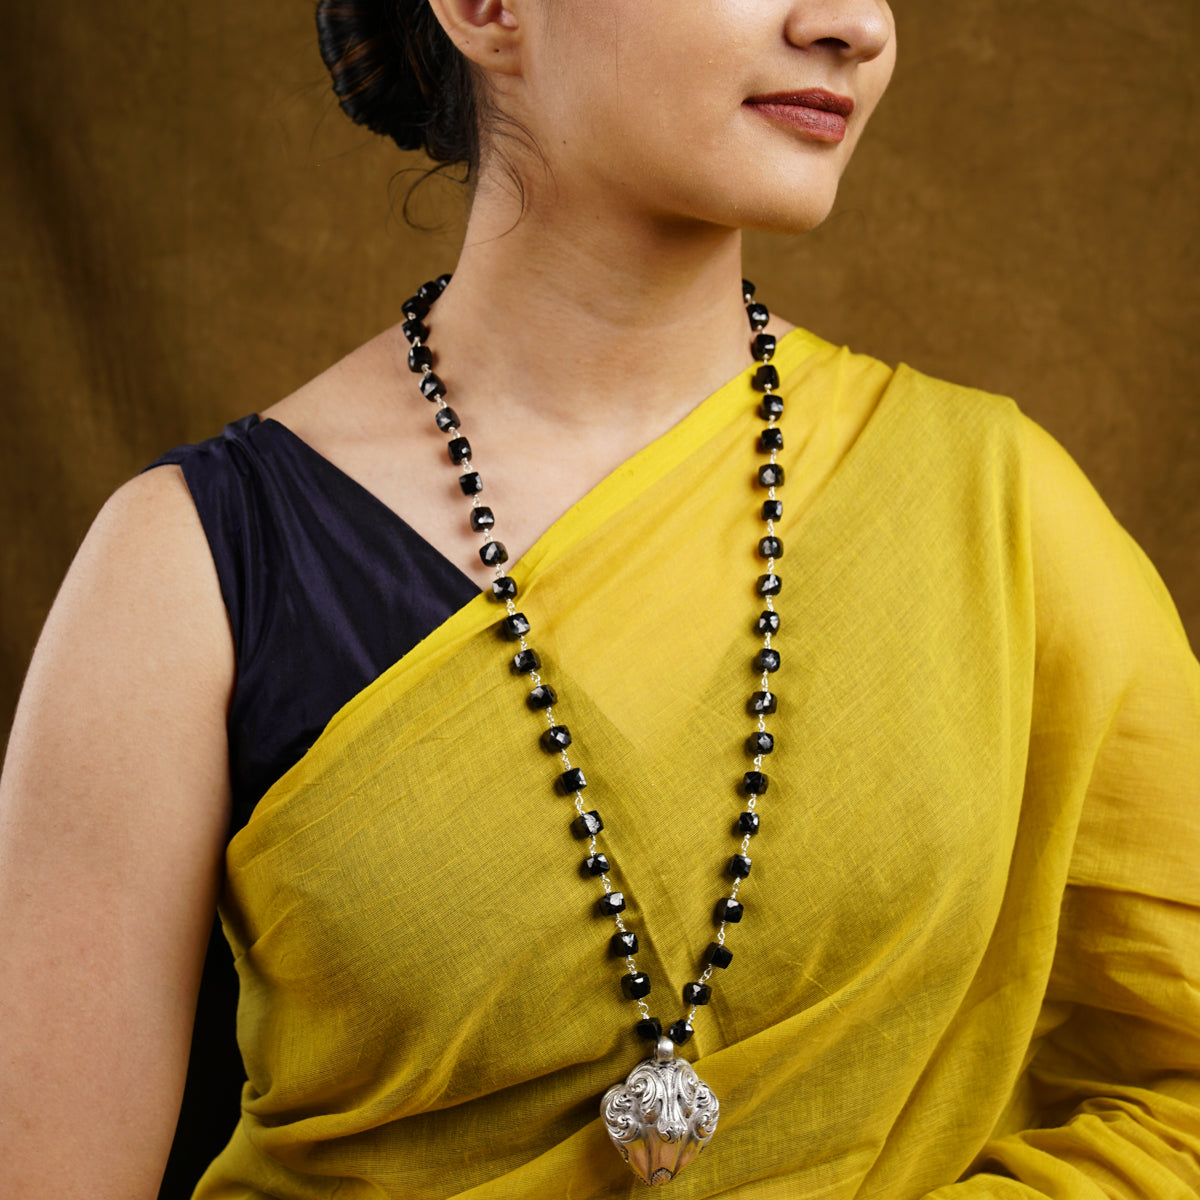 a woman in a yellow sari with a black beaded necklace